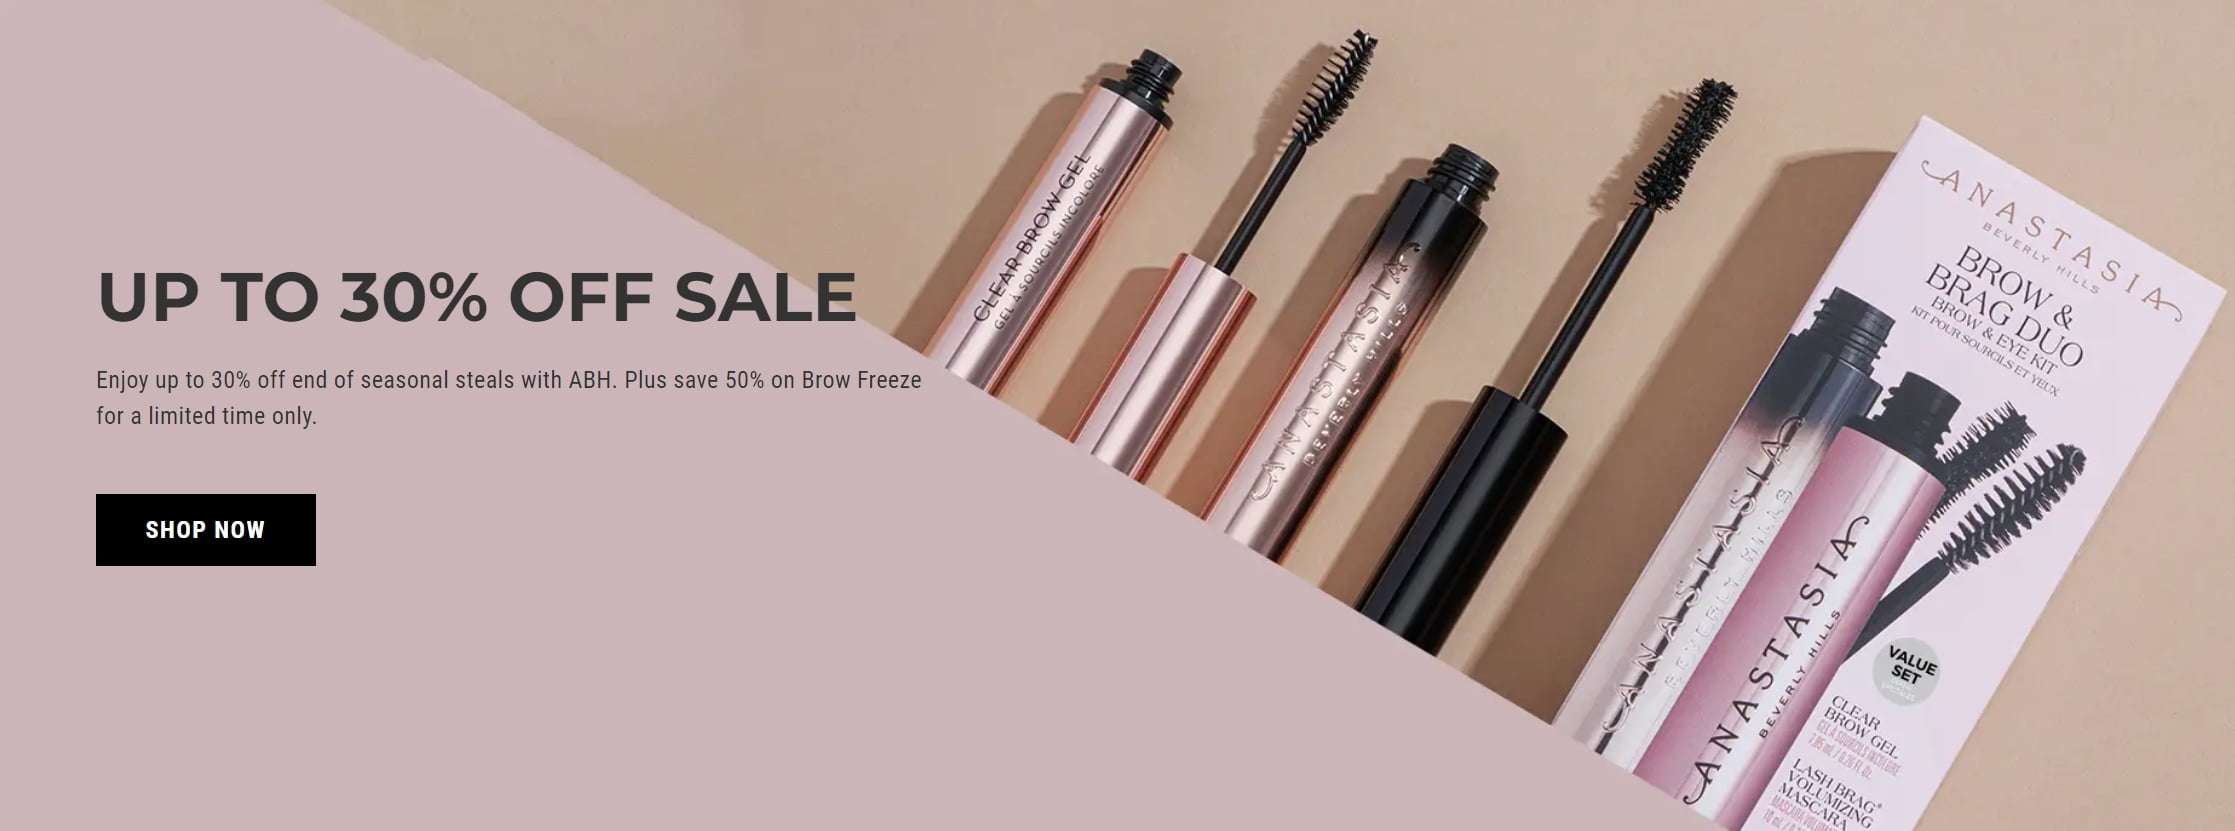 Up to 30% off End of Season Sale at Anastasia Beverly Hills